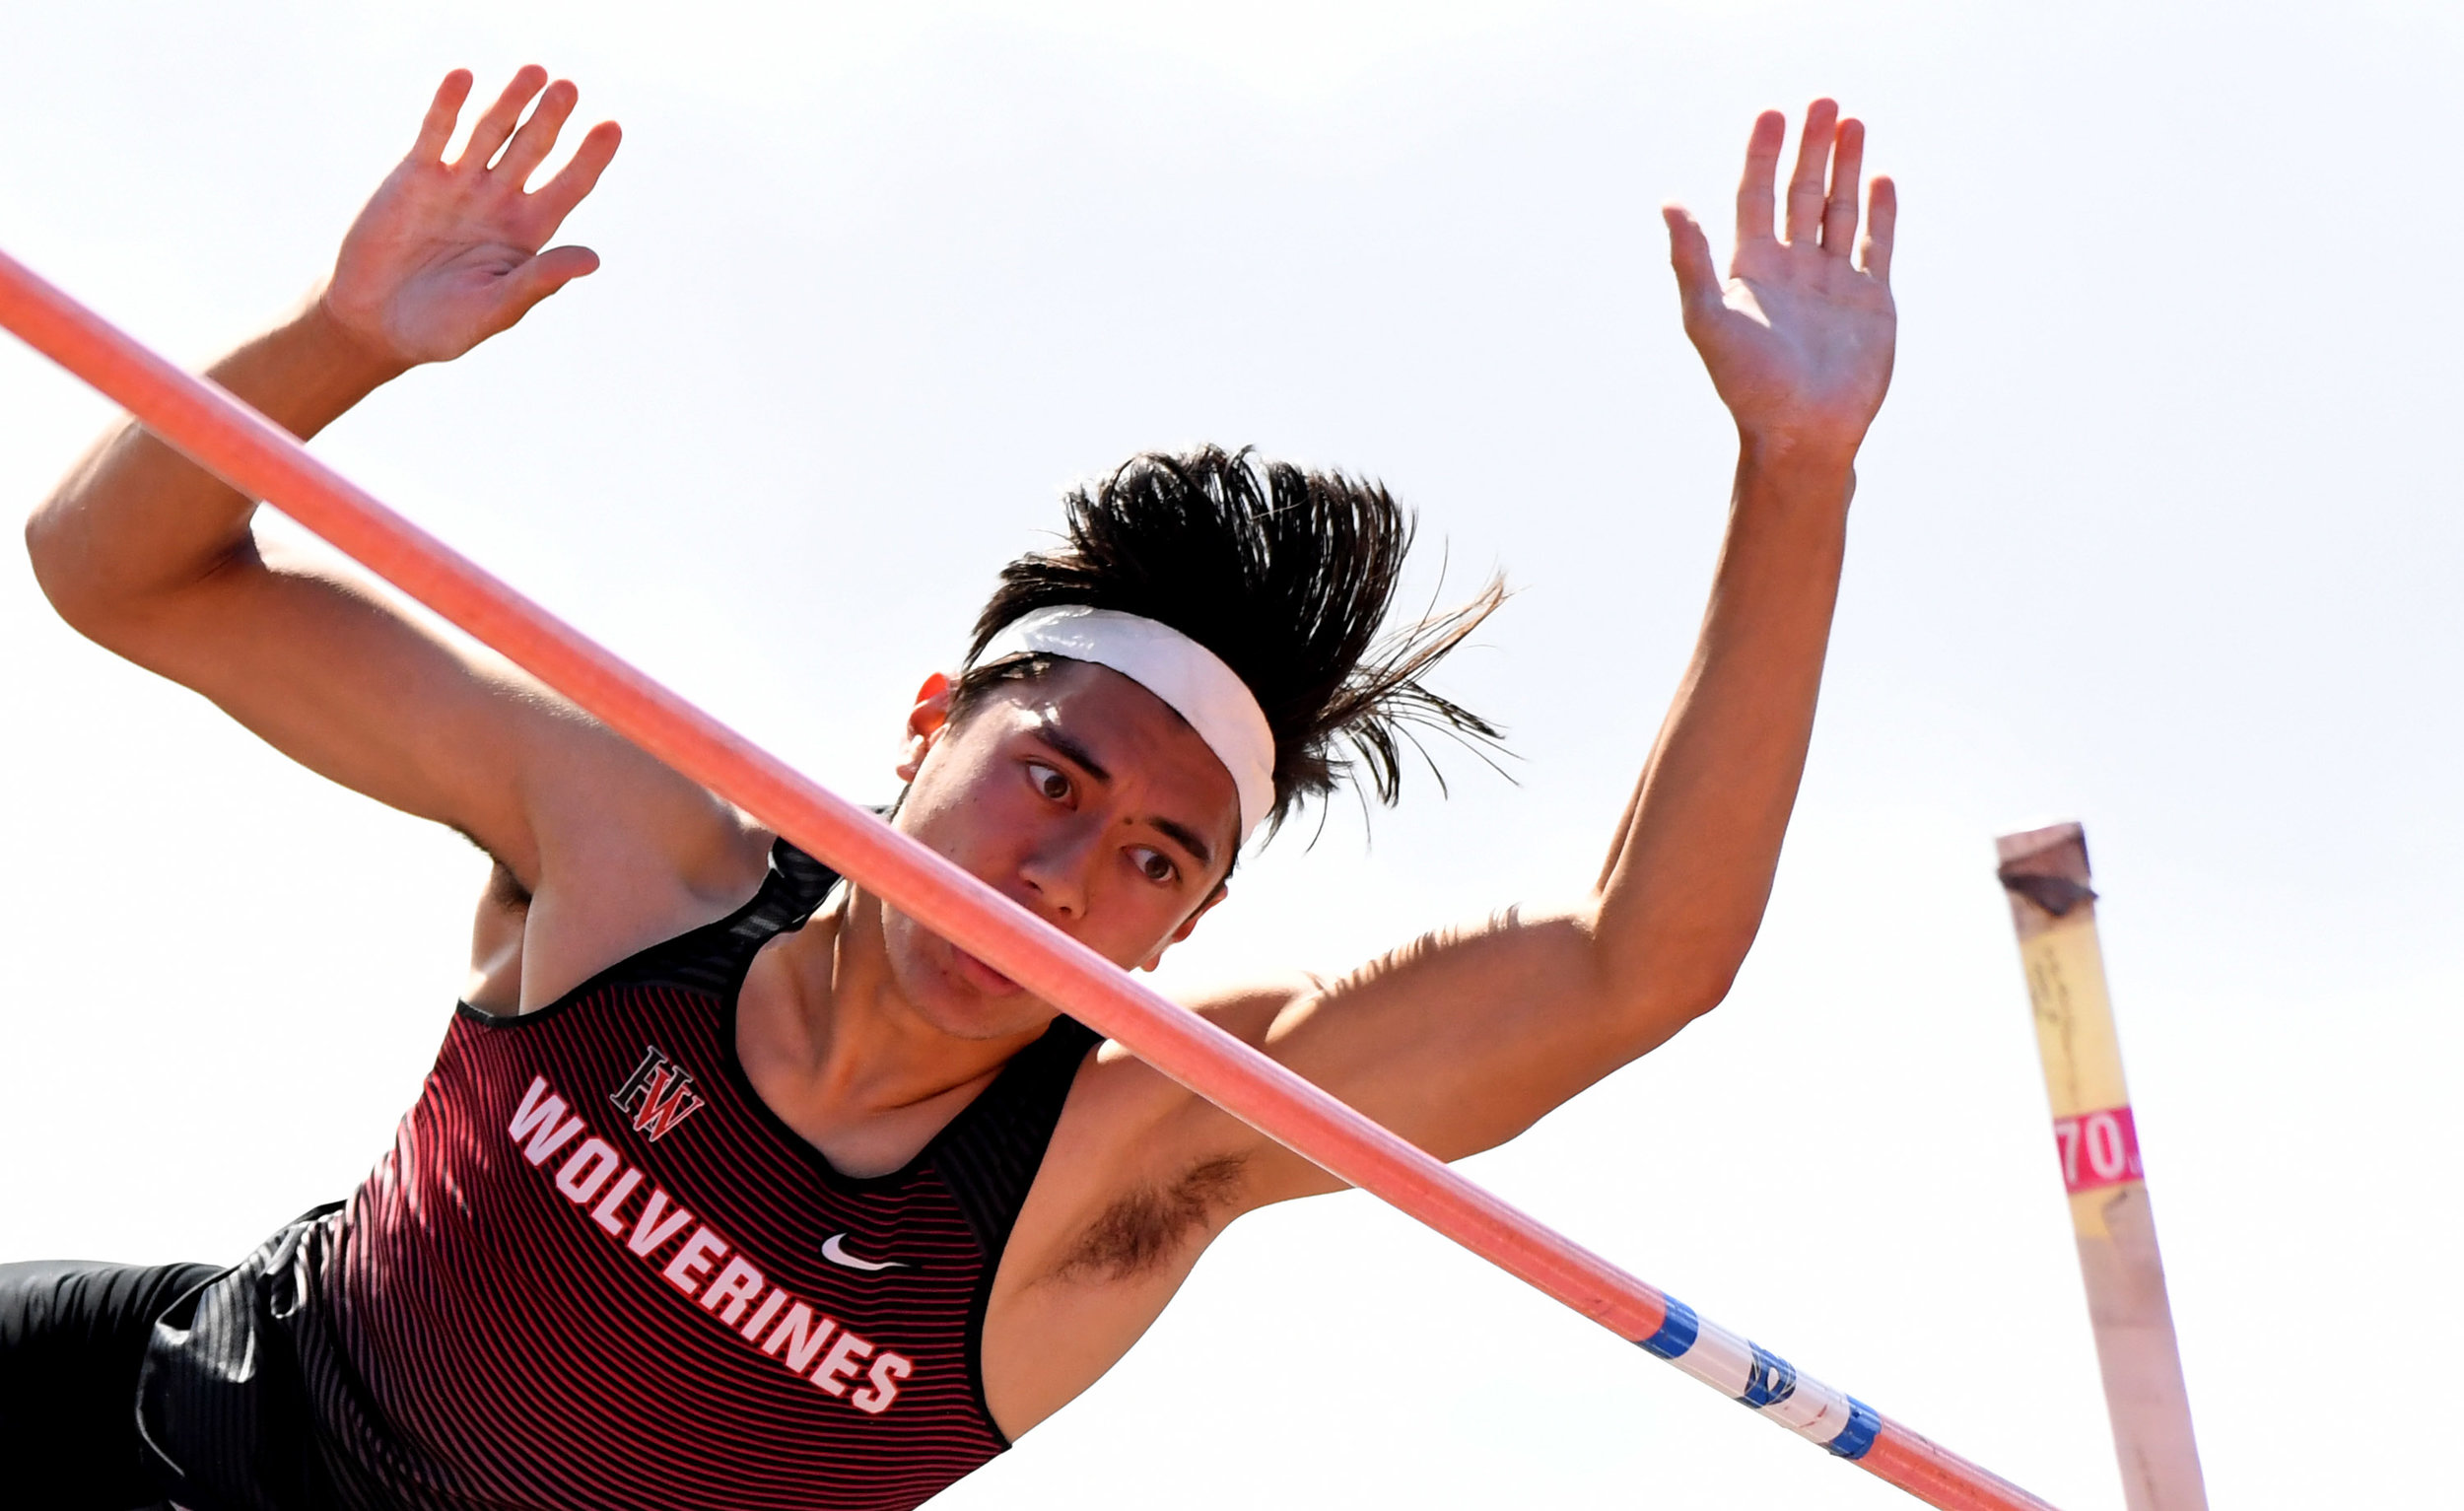  Harvard Westlake's Tiber Seireeni finished second win the pole vault during the CIF-SS Track and Field Masters meet at El Camino College in Torrance, Calif., on Saturday, May 26, 2018.  